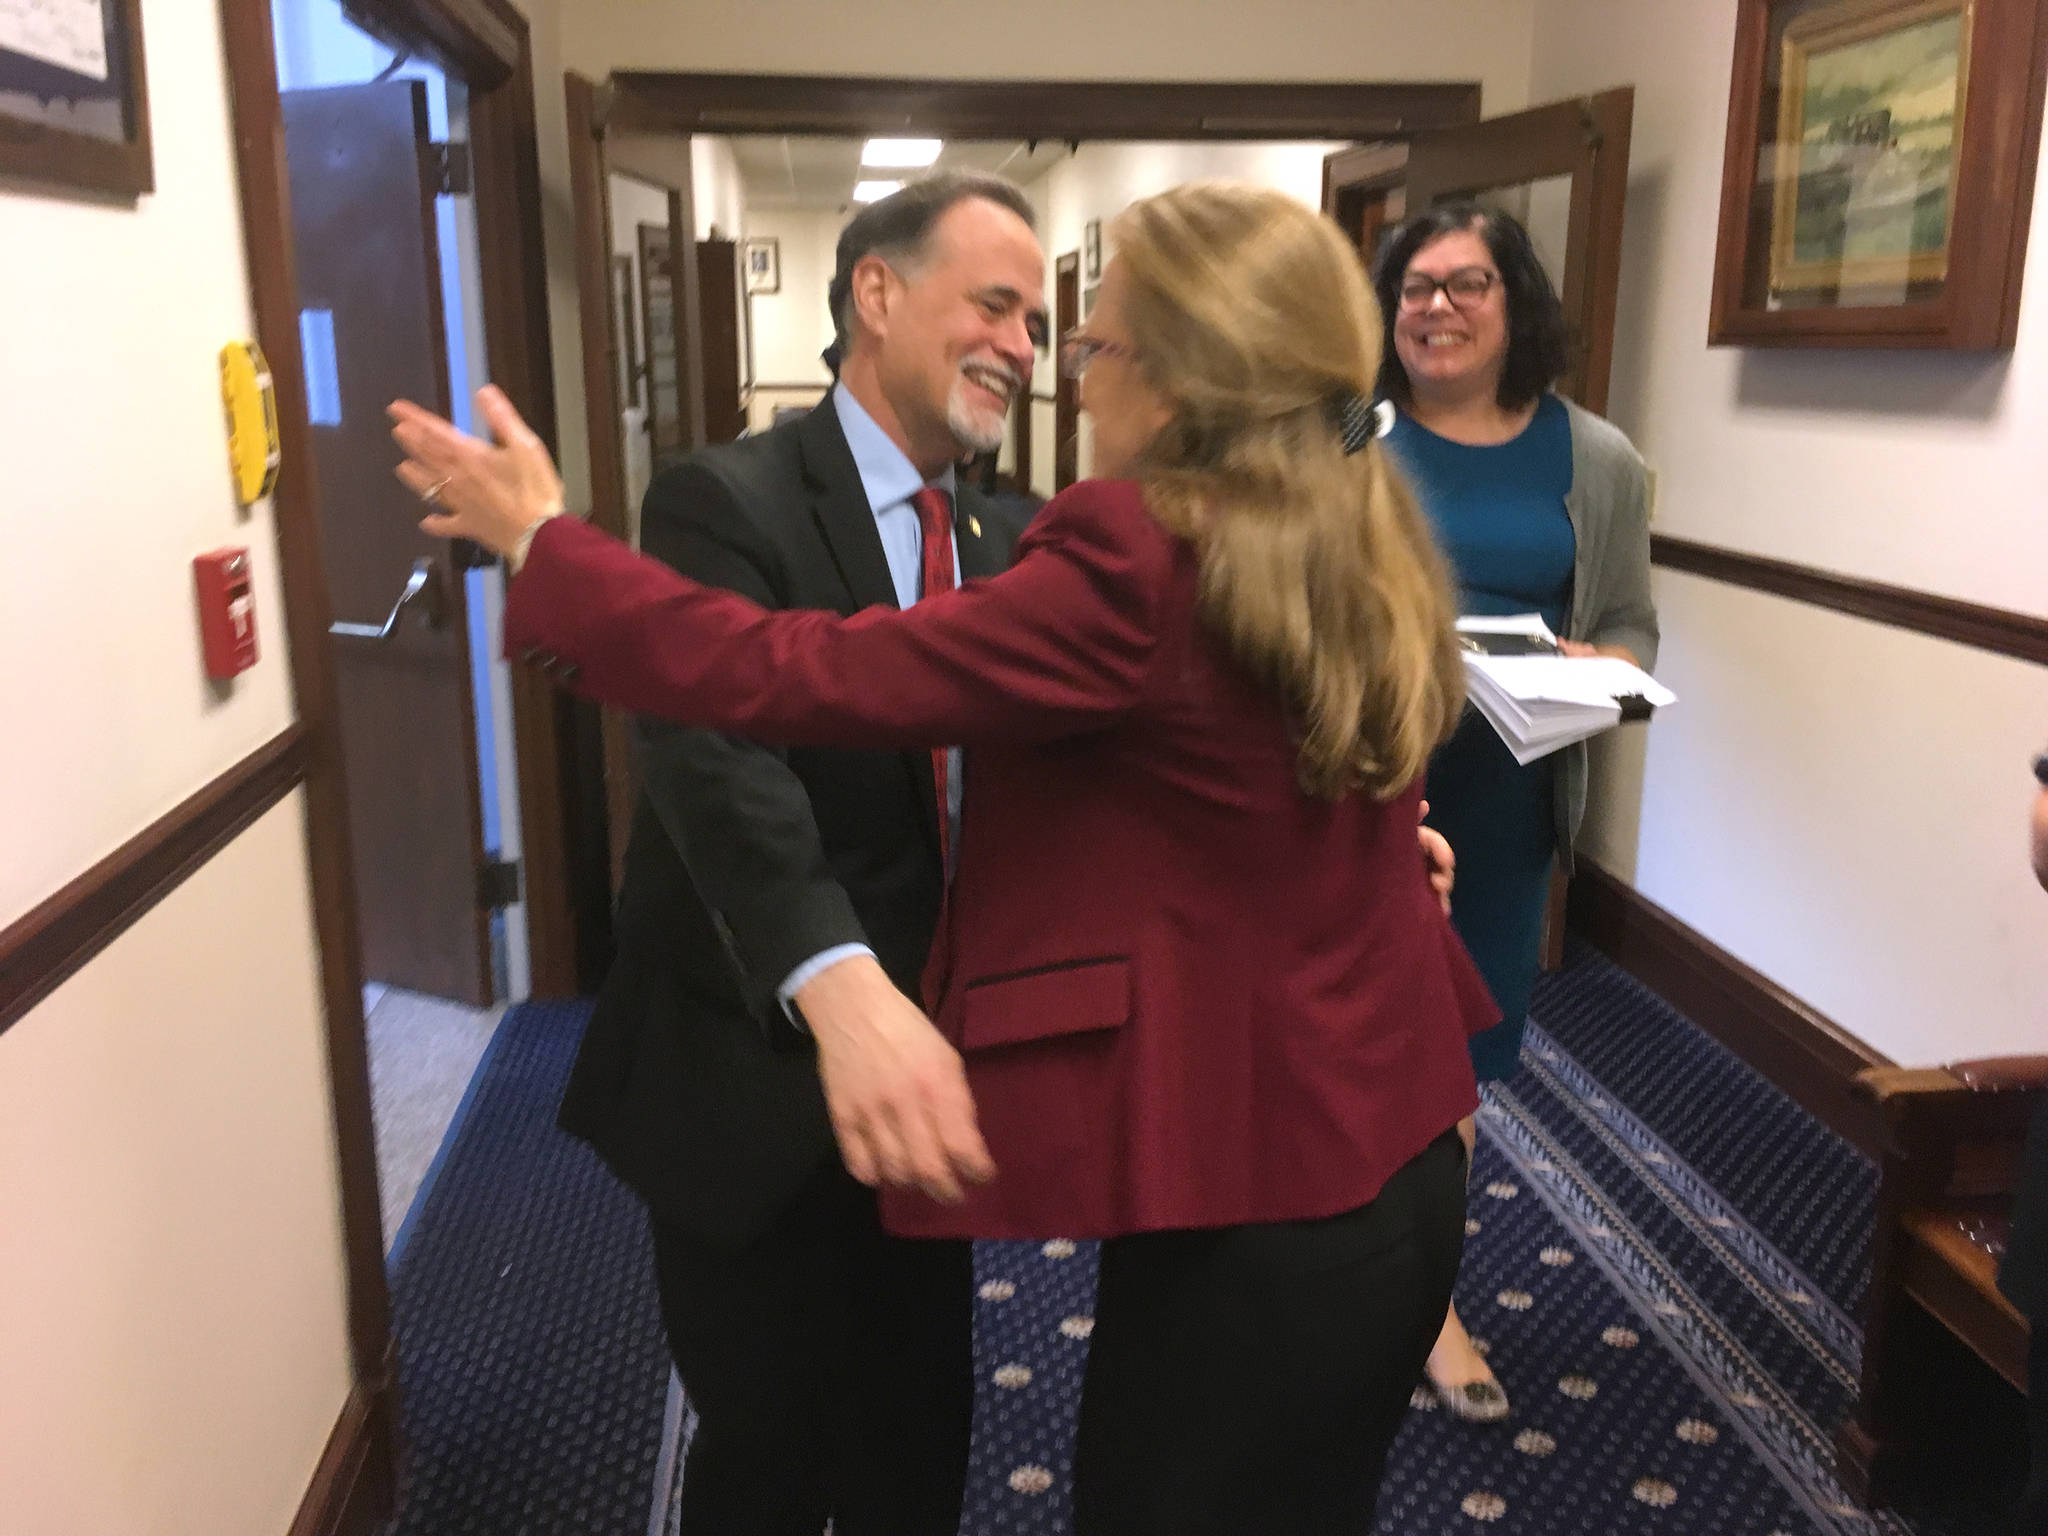 Sen. Peter Micciche, R-Soldotna (left), receives a hug from Emily Nenon, Alaska government relations director for the American Cancer Society Cancer Action Network. The action network was a major supporter of Senate Bill 63, and the pair were celebrating the passage of SB 63 on Saturday, May 12, 2018. (James Brooks | Juneau Empire)